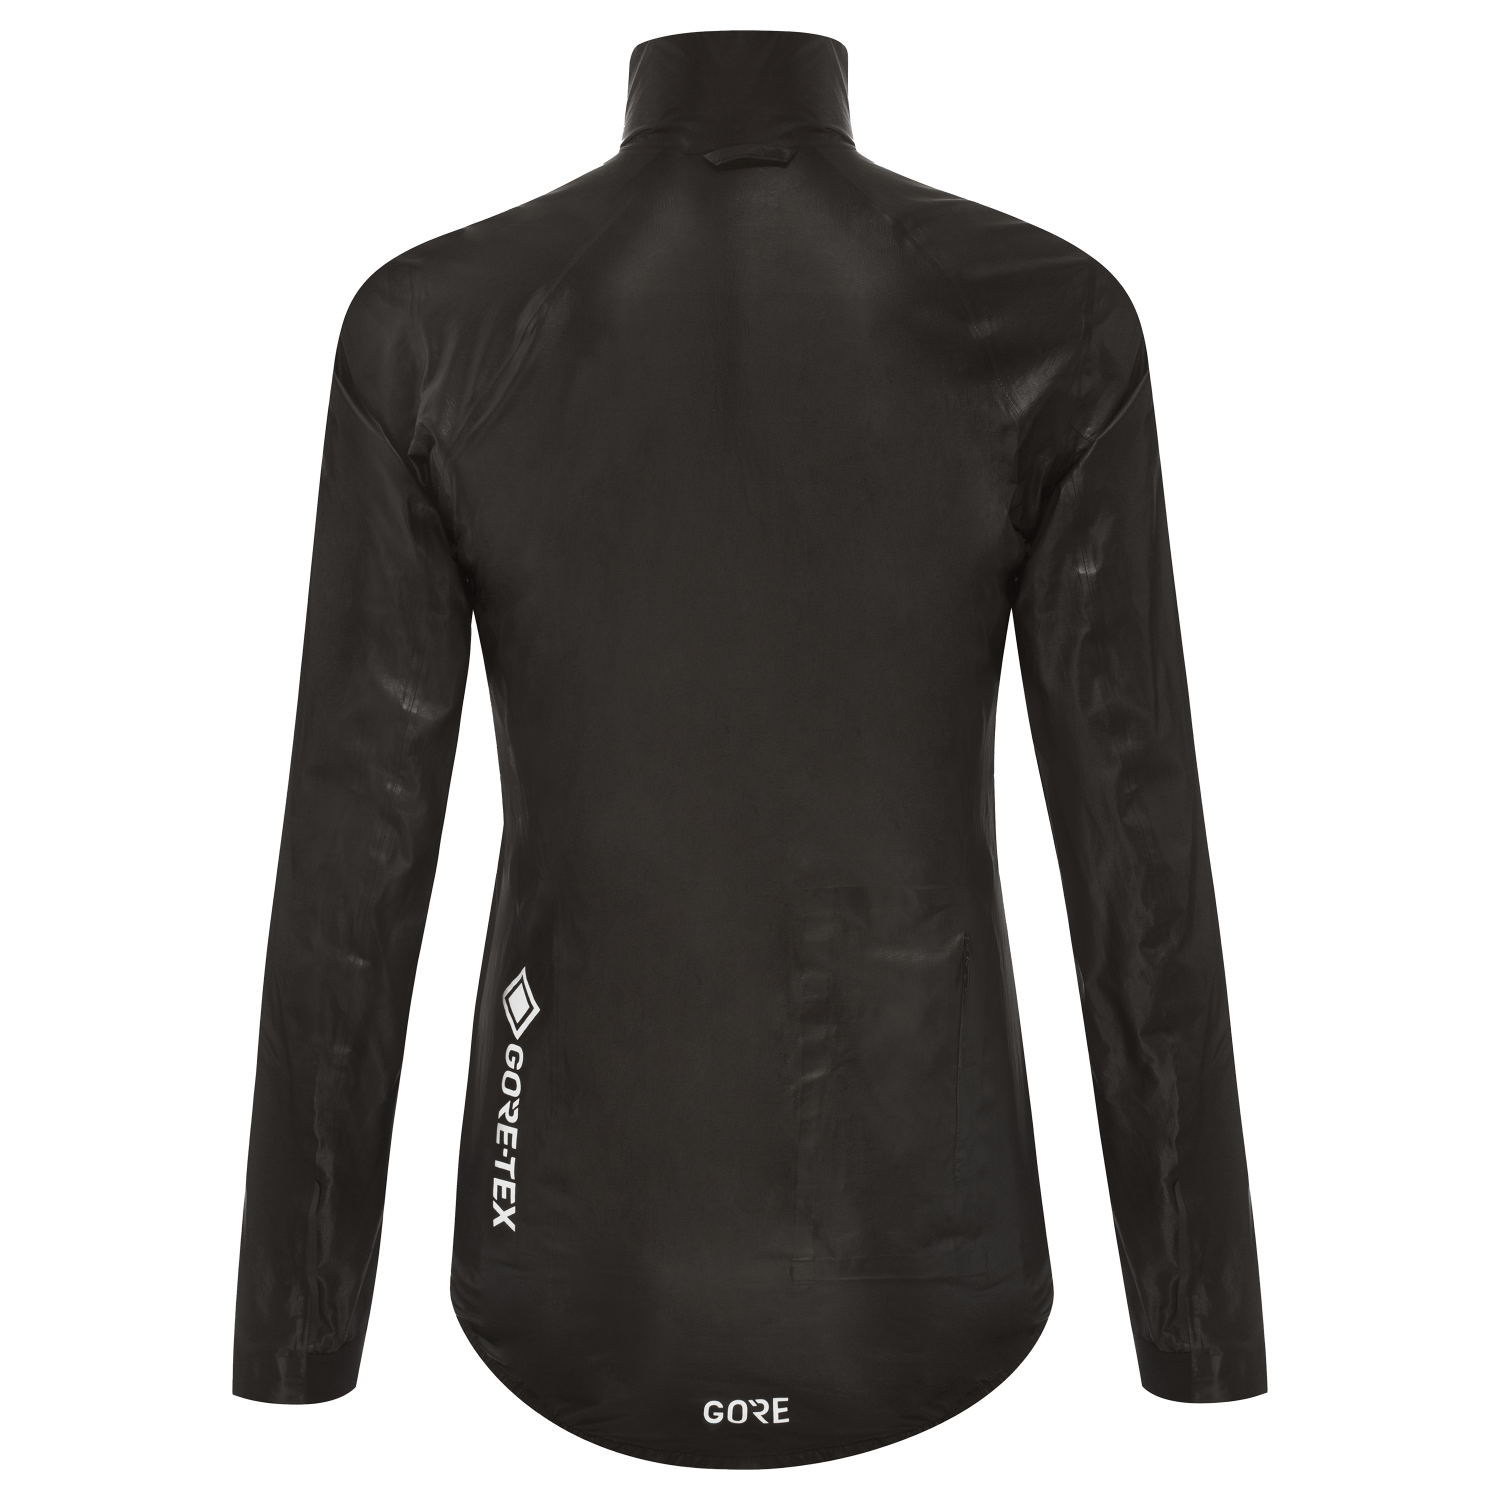  GORE Wear Women's Waterproof Cycling Jacket, C3 Women's GORE-TEX  Active Jacket, Size: M, Color: Black, 100041 : Clothing, Shoes & Jewelry